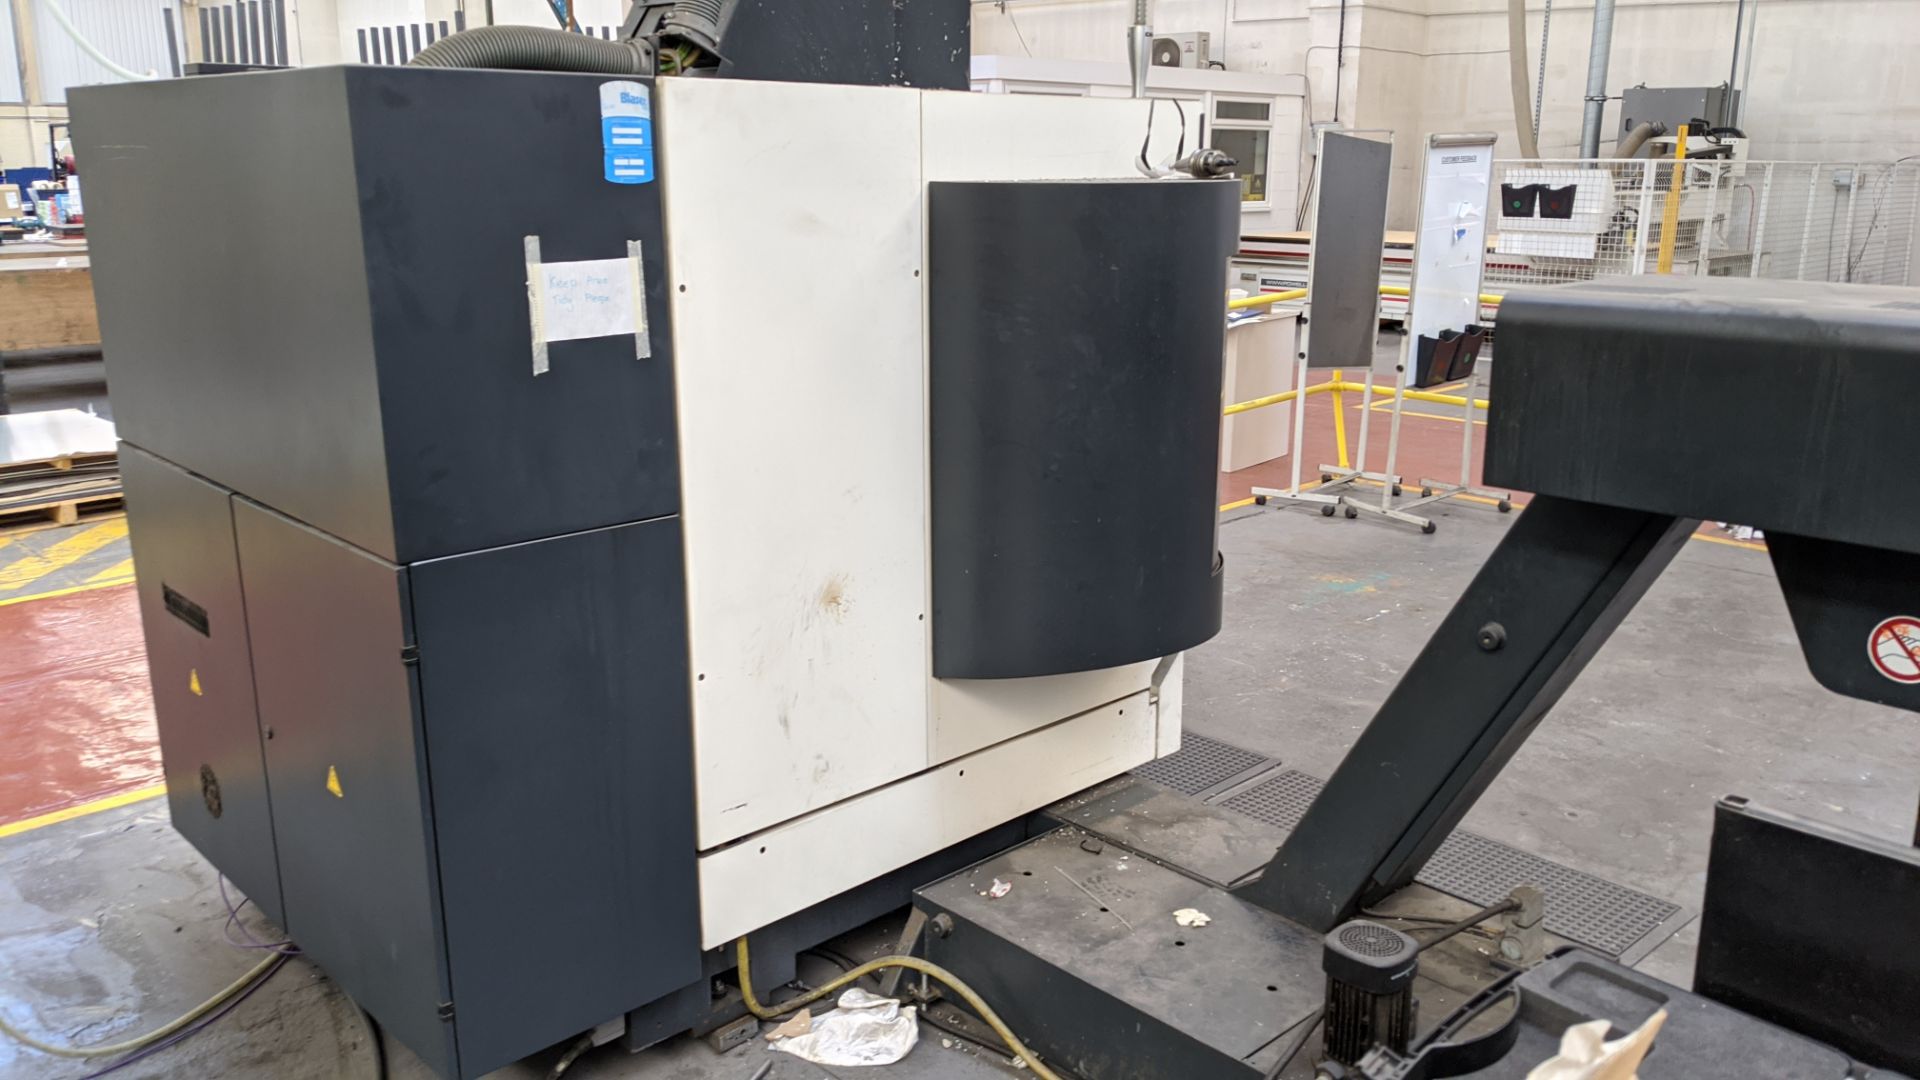 2012 DMG Gildemeister DMU 50 Ecoline Eco 5-axis milling machining centre with Siemens DMG control - Image 10 of 19